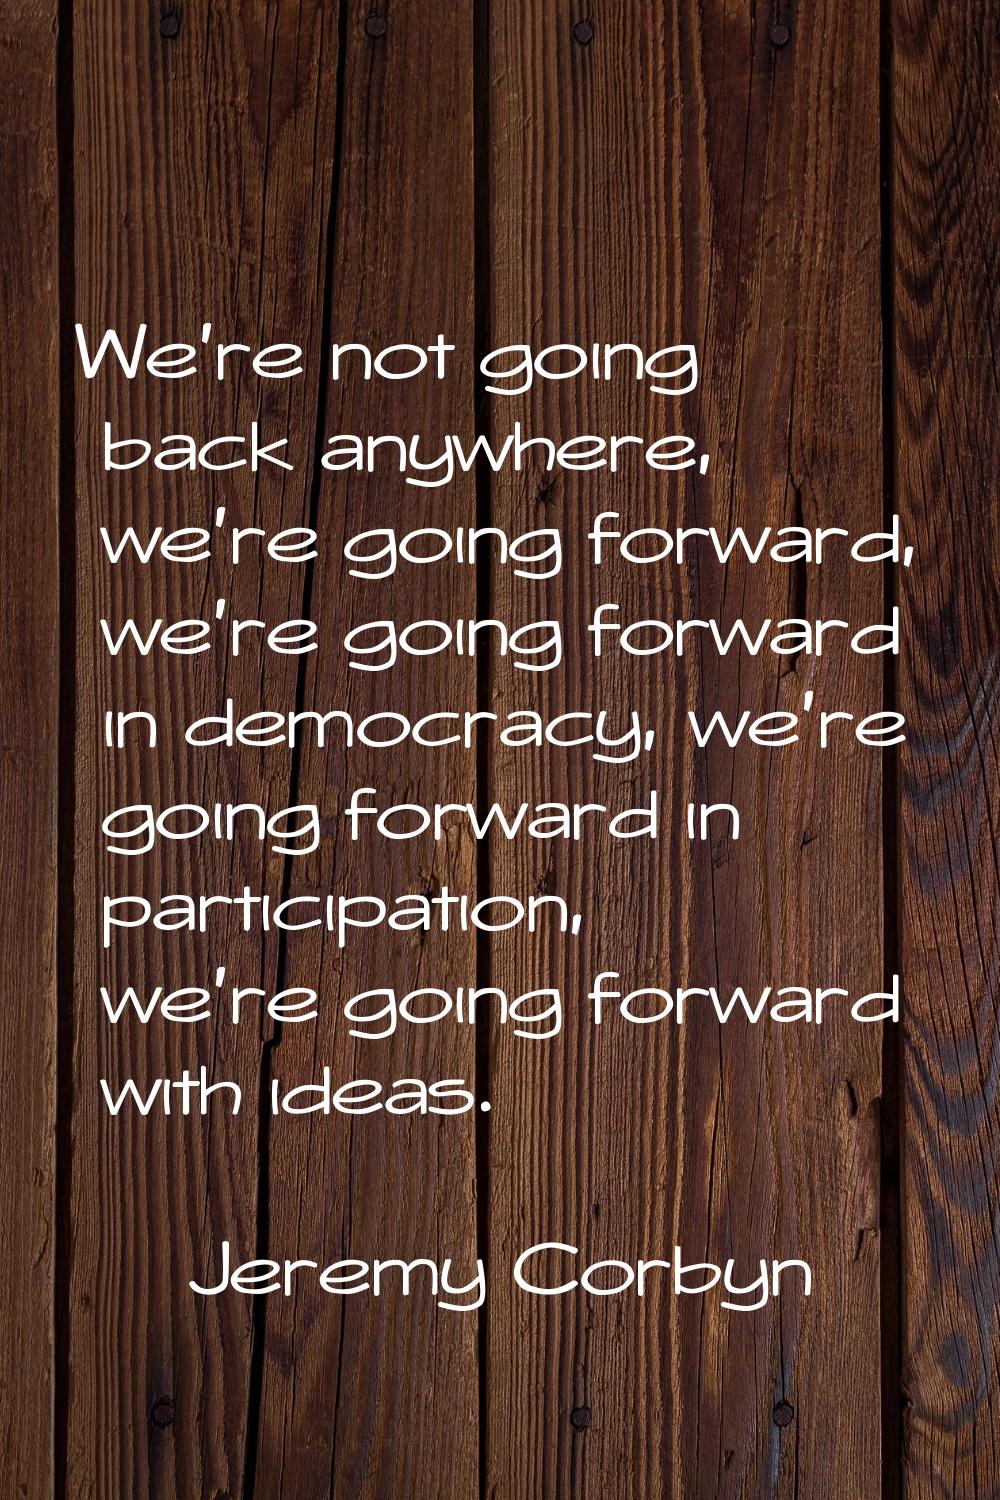 We're not going back anywhere, we're going forward, we're going forward in democracy, we're going f